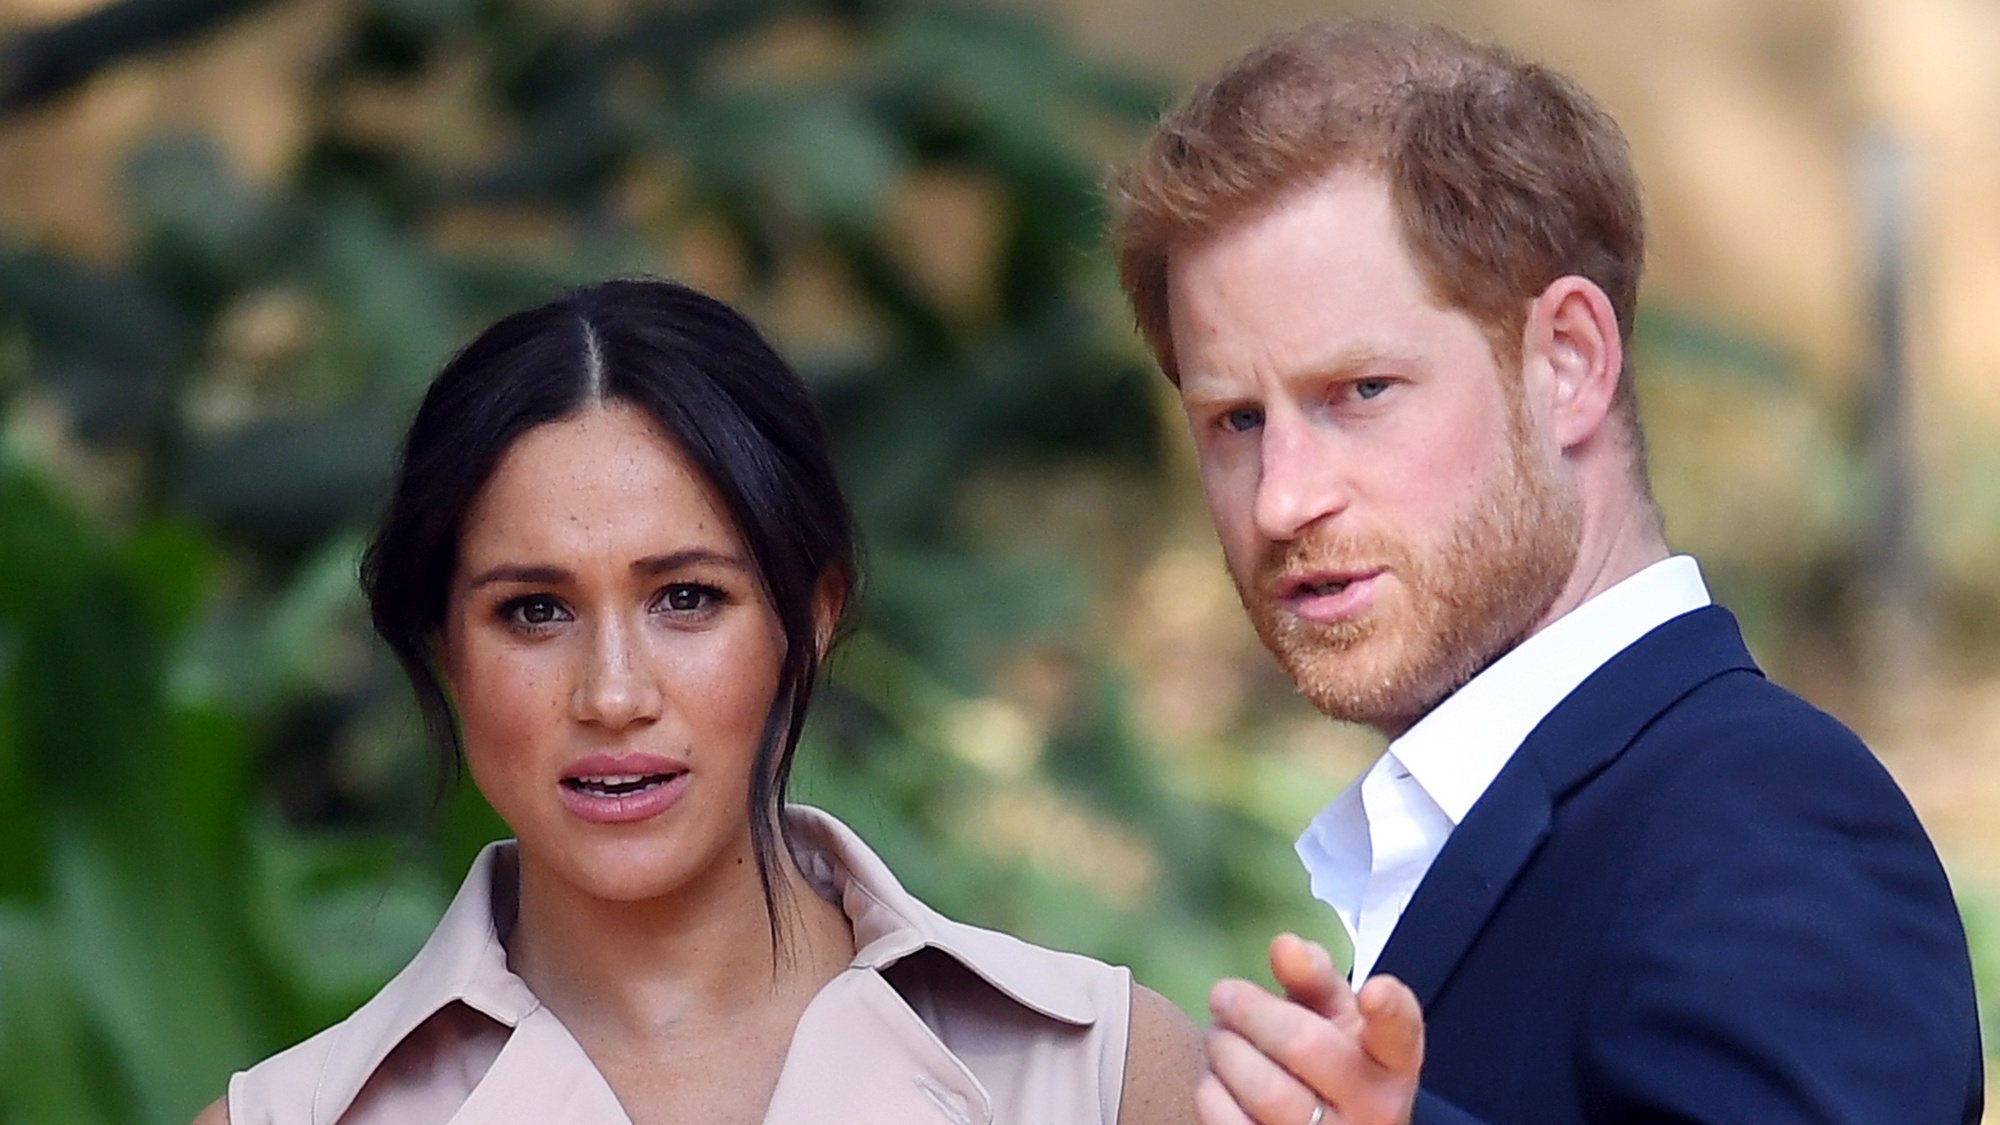 epa08395995 (FILE) Britain&#039;s Prince Harry, Duke of Sussex (R) and his wife Meghan, Duchess of Sussex attend a creative industries and business reception at the High Commissioner&#039;s residence in Johannesburg, South Africa, 02 October 2019 (reissued 01 May 2020). According to media reports on 01 May 2020, a judge at London&#039;s High Court ruled against key claims in a lawsuit brought by the Duchess of Sussex against The Mail on Sunday. The Duchess of Sussex is suing Associated Newspapers, the British tabloid&#039;s parent company, over privacy infringement and copyright breach after the Mail on Sunday published a private letter she sent to her father, Thomas Markle, berfore her wedding to Prince Harry.  EPA/FACUNDO ARRIZABALAGA *** Local Caption *** 55752202